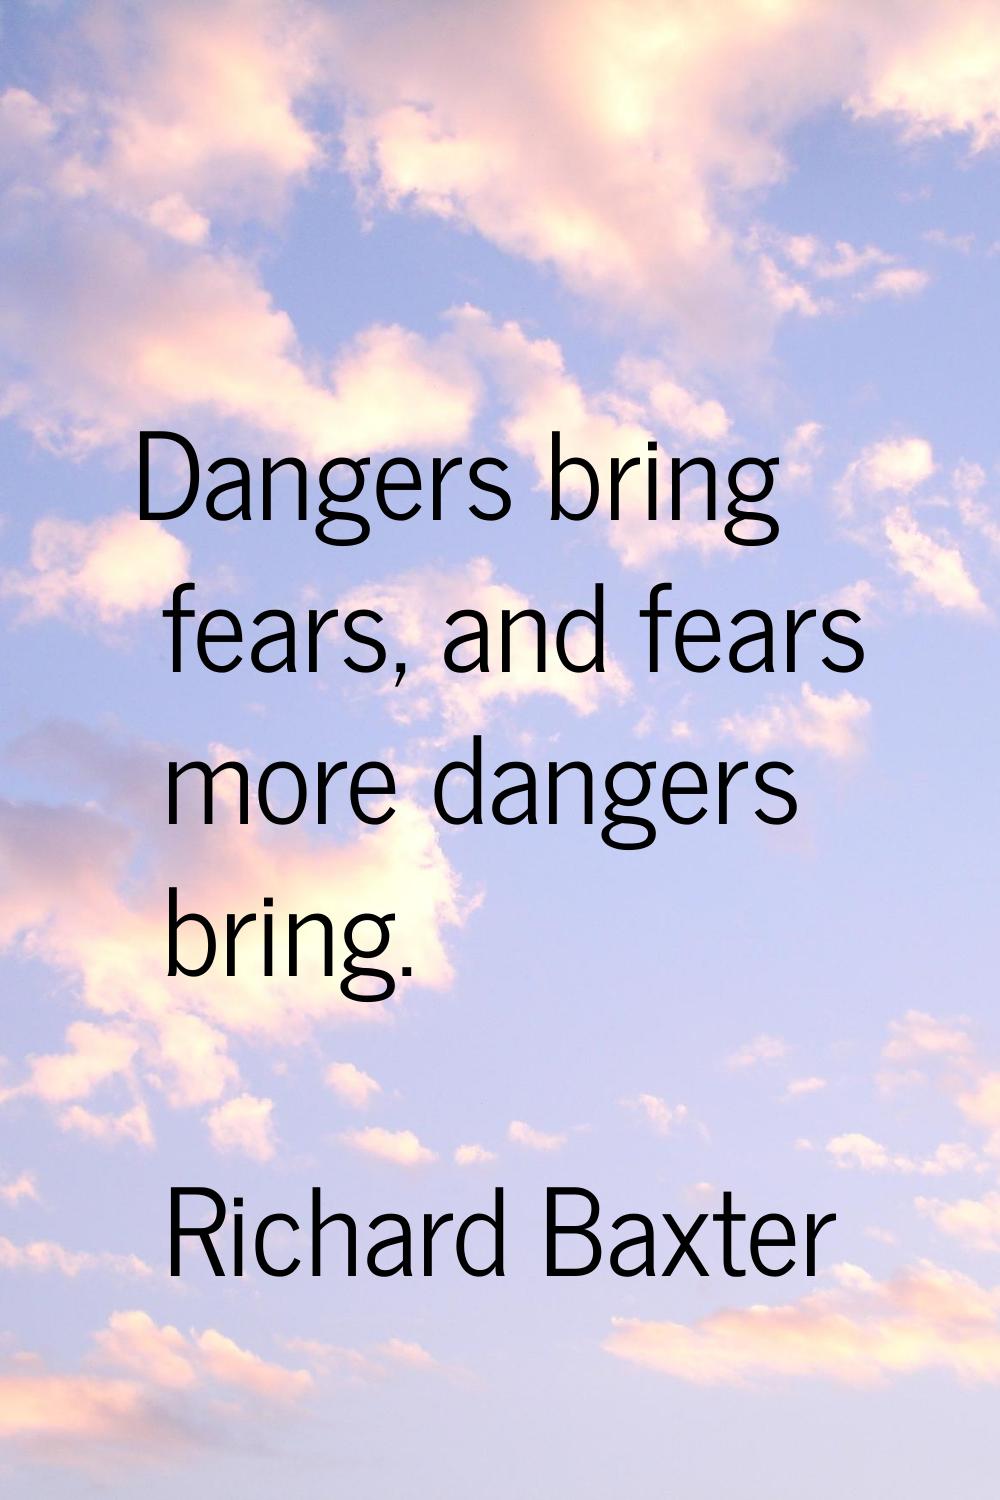 Dangers bring fears, and fears more dangers bring.